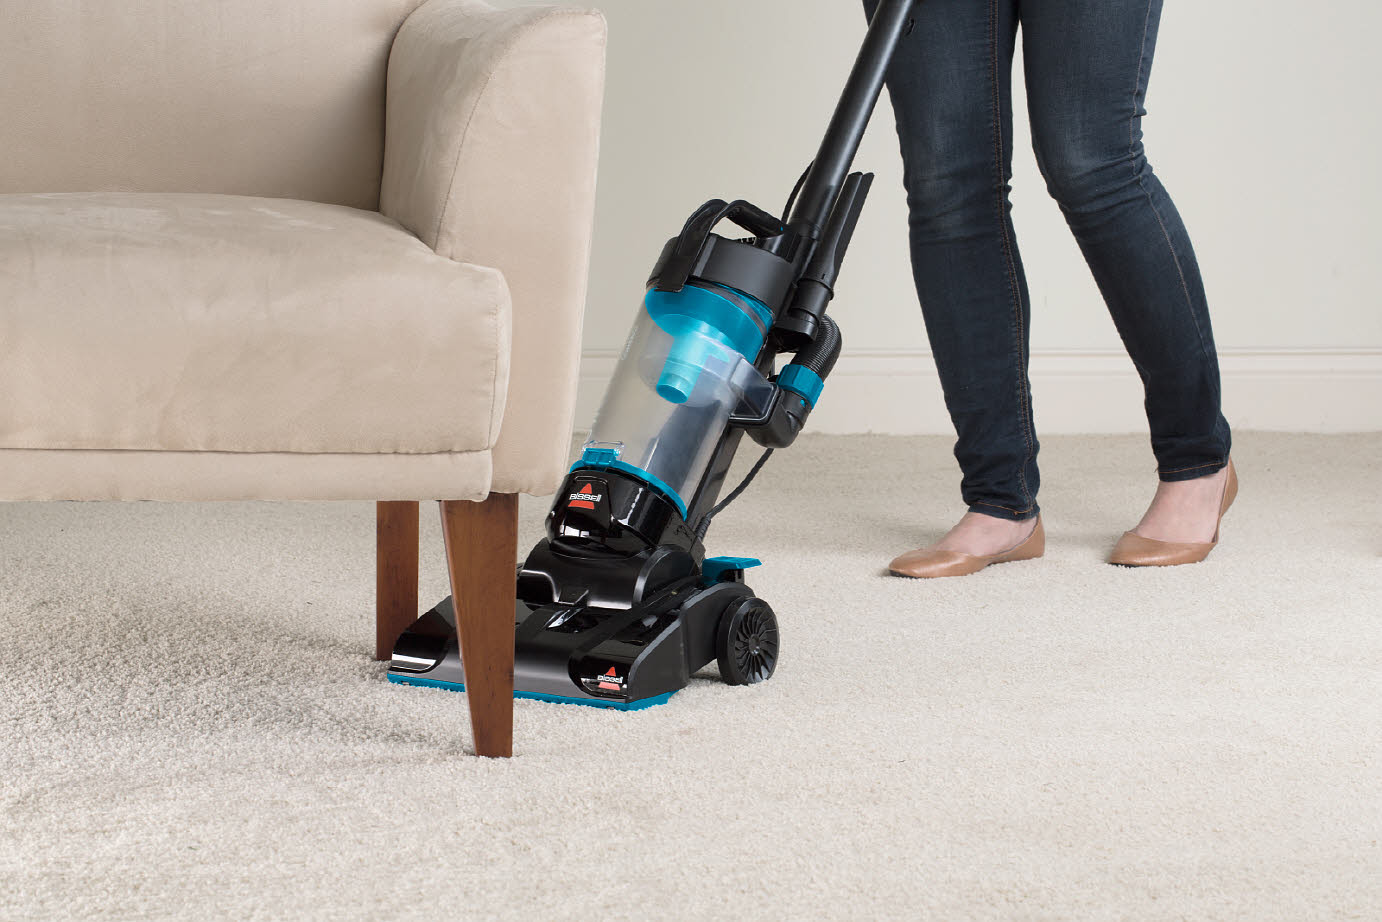 24 Elegant the Best Vacuum Cleaner for Hardwood Floors 2024 free download the best vacuum cleaner for hardwood floors of bissell powerforce compact bagless vacuum walmart com pertaining to 22713995 fbd6 4d46 a83a 6071f6d3b3be 1 05935c08126bdc5192edaf92004c3fba